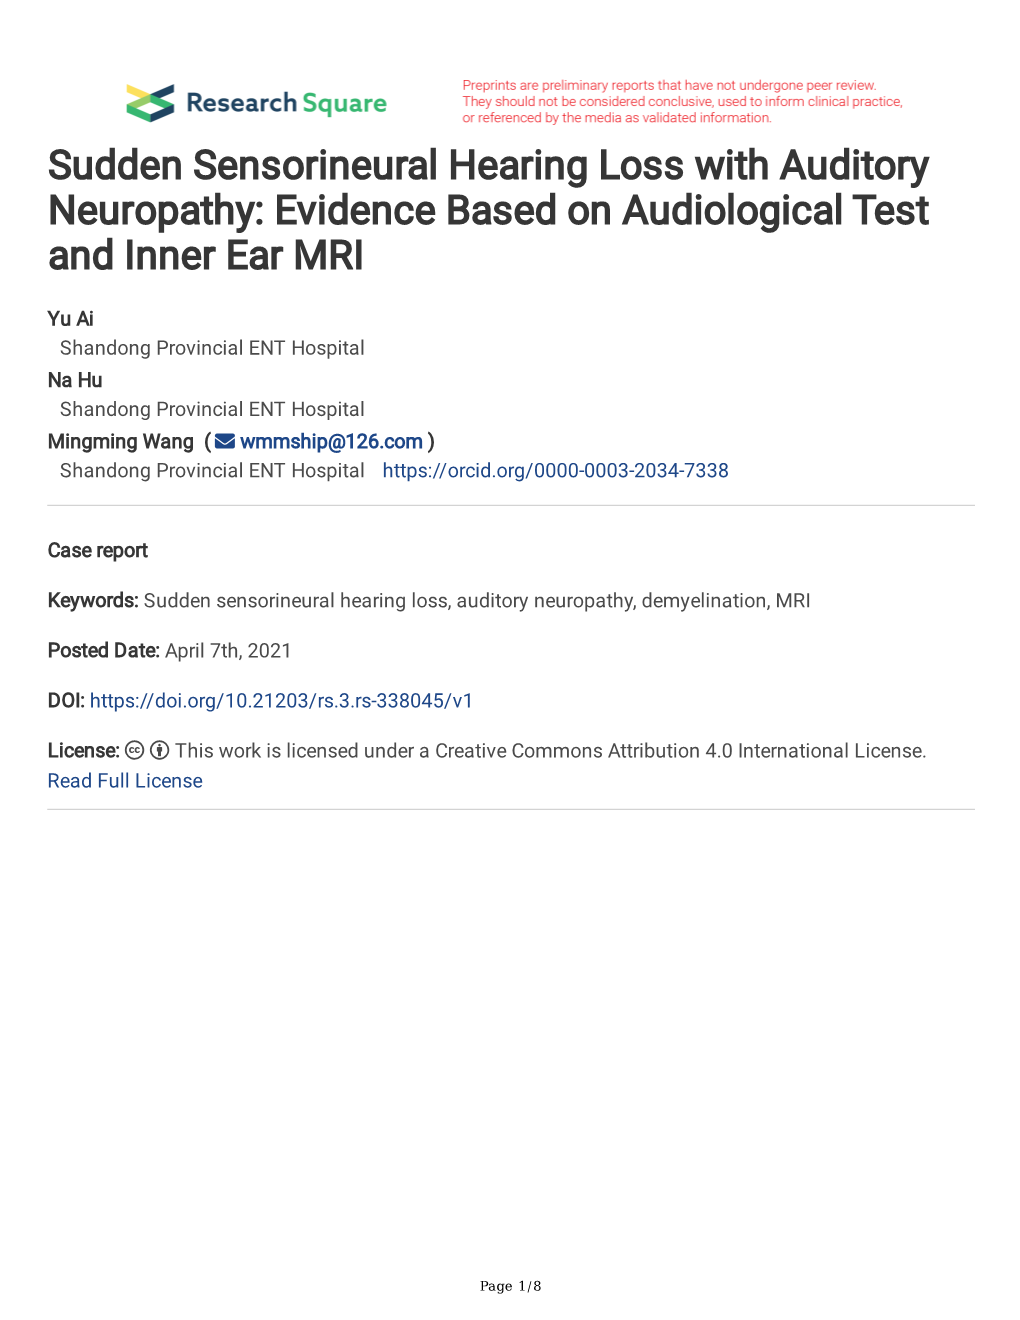 Sudden Sensorineural Hearing Loss with Auditory Neuropathy: Evidence Based on Audiological Test and Inner Ear MRI